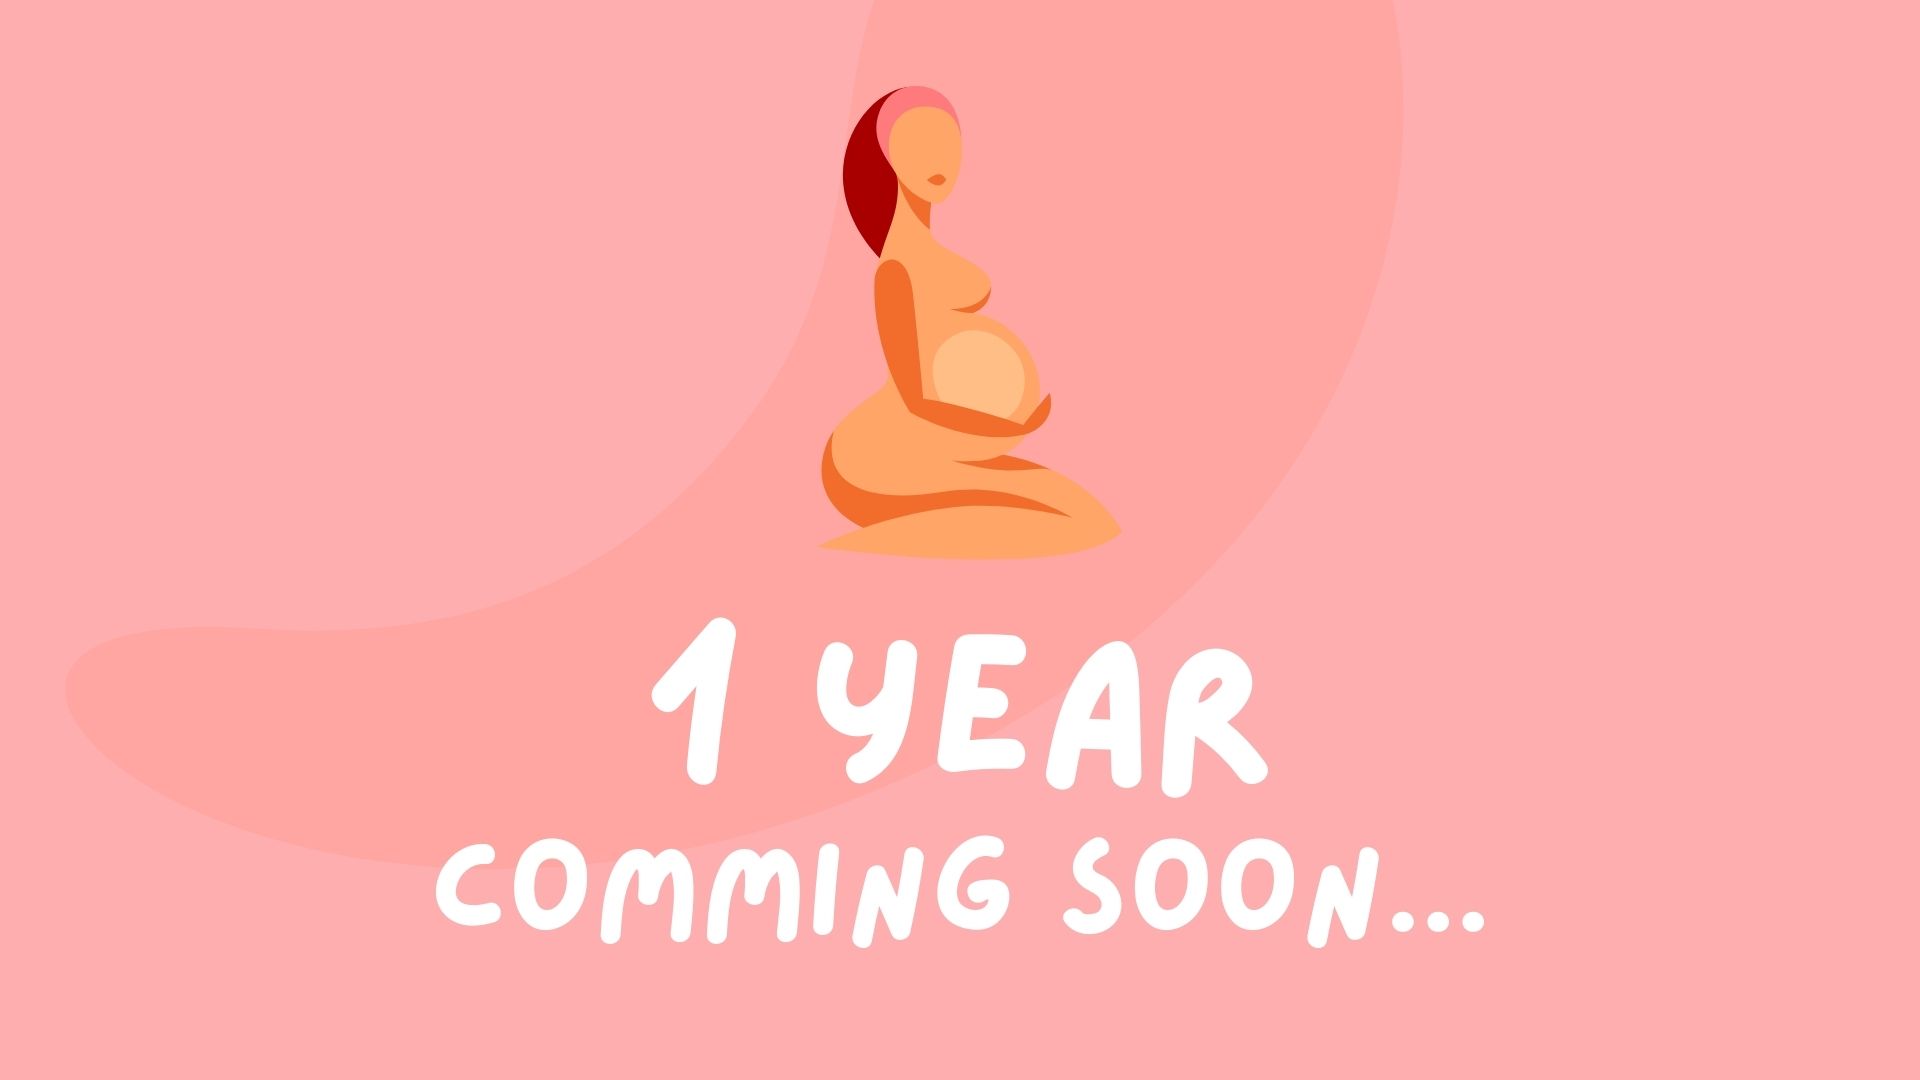 image of a 1 year old baby coming soon announcement